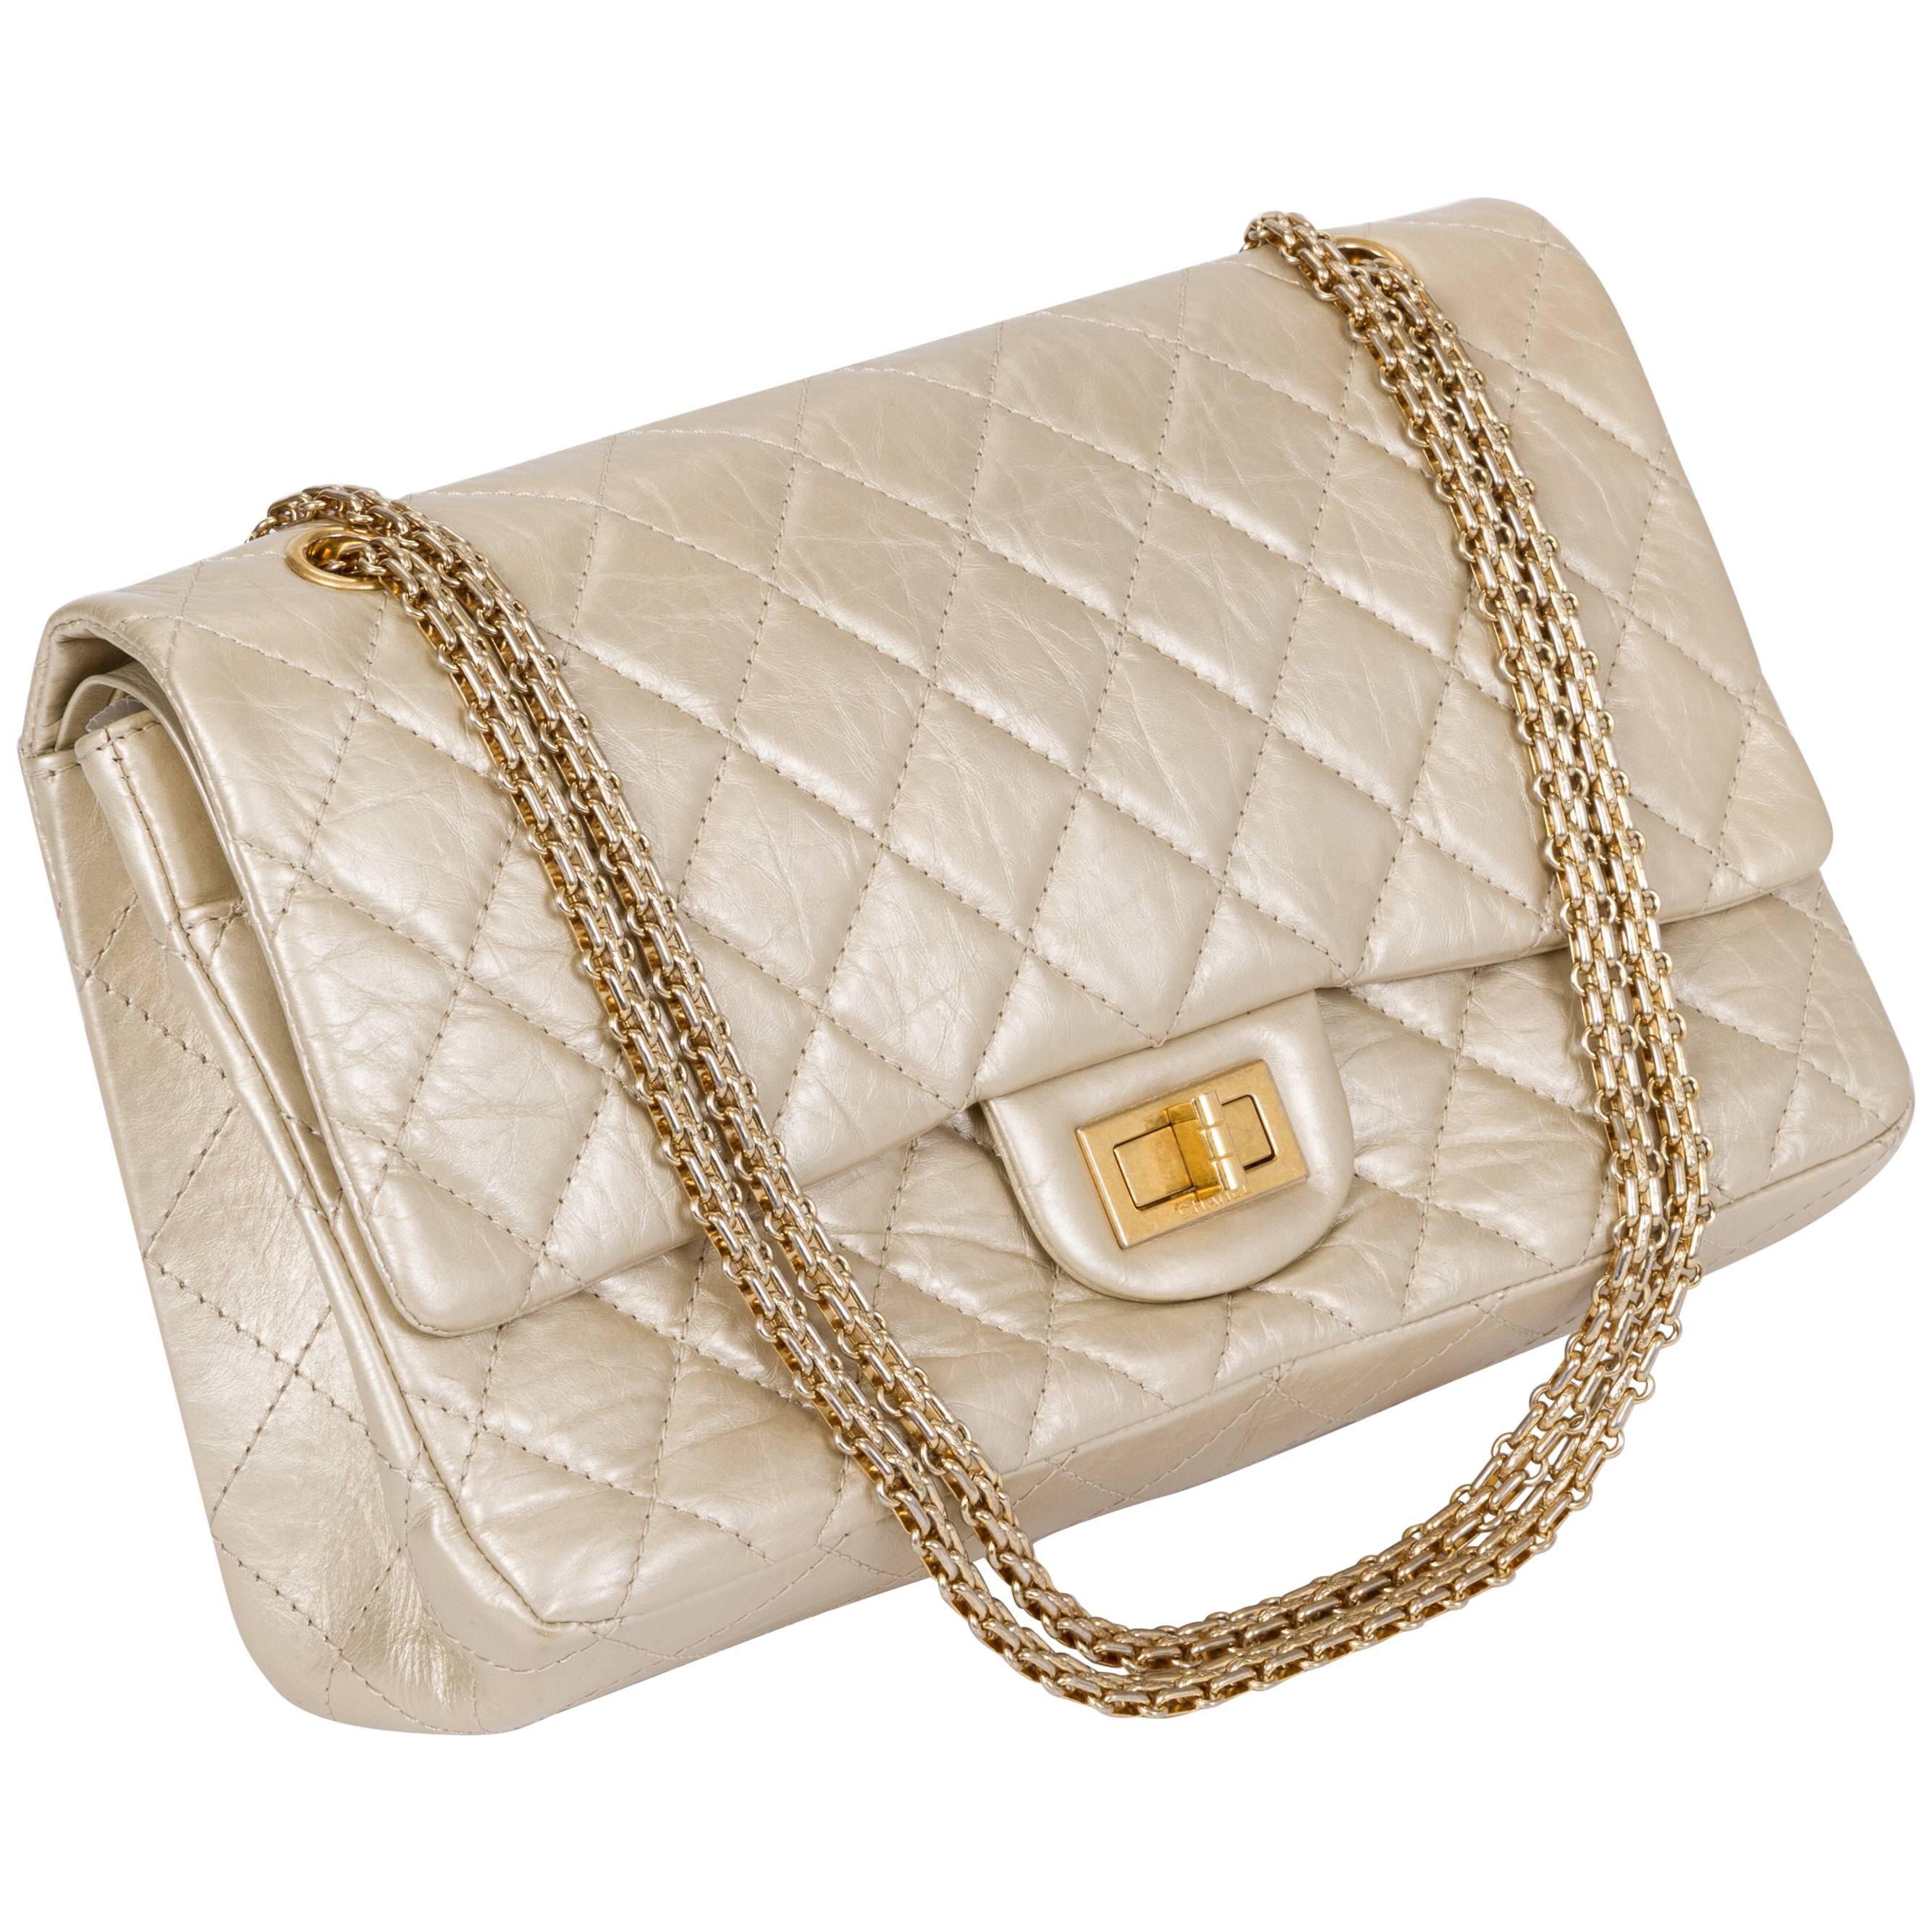 Chanel Gold Distressed Jumbo Reissue Bag